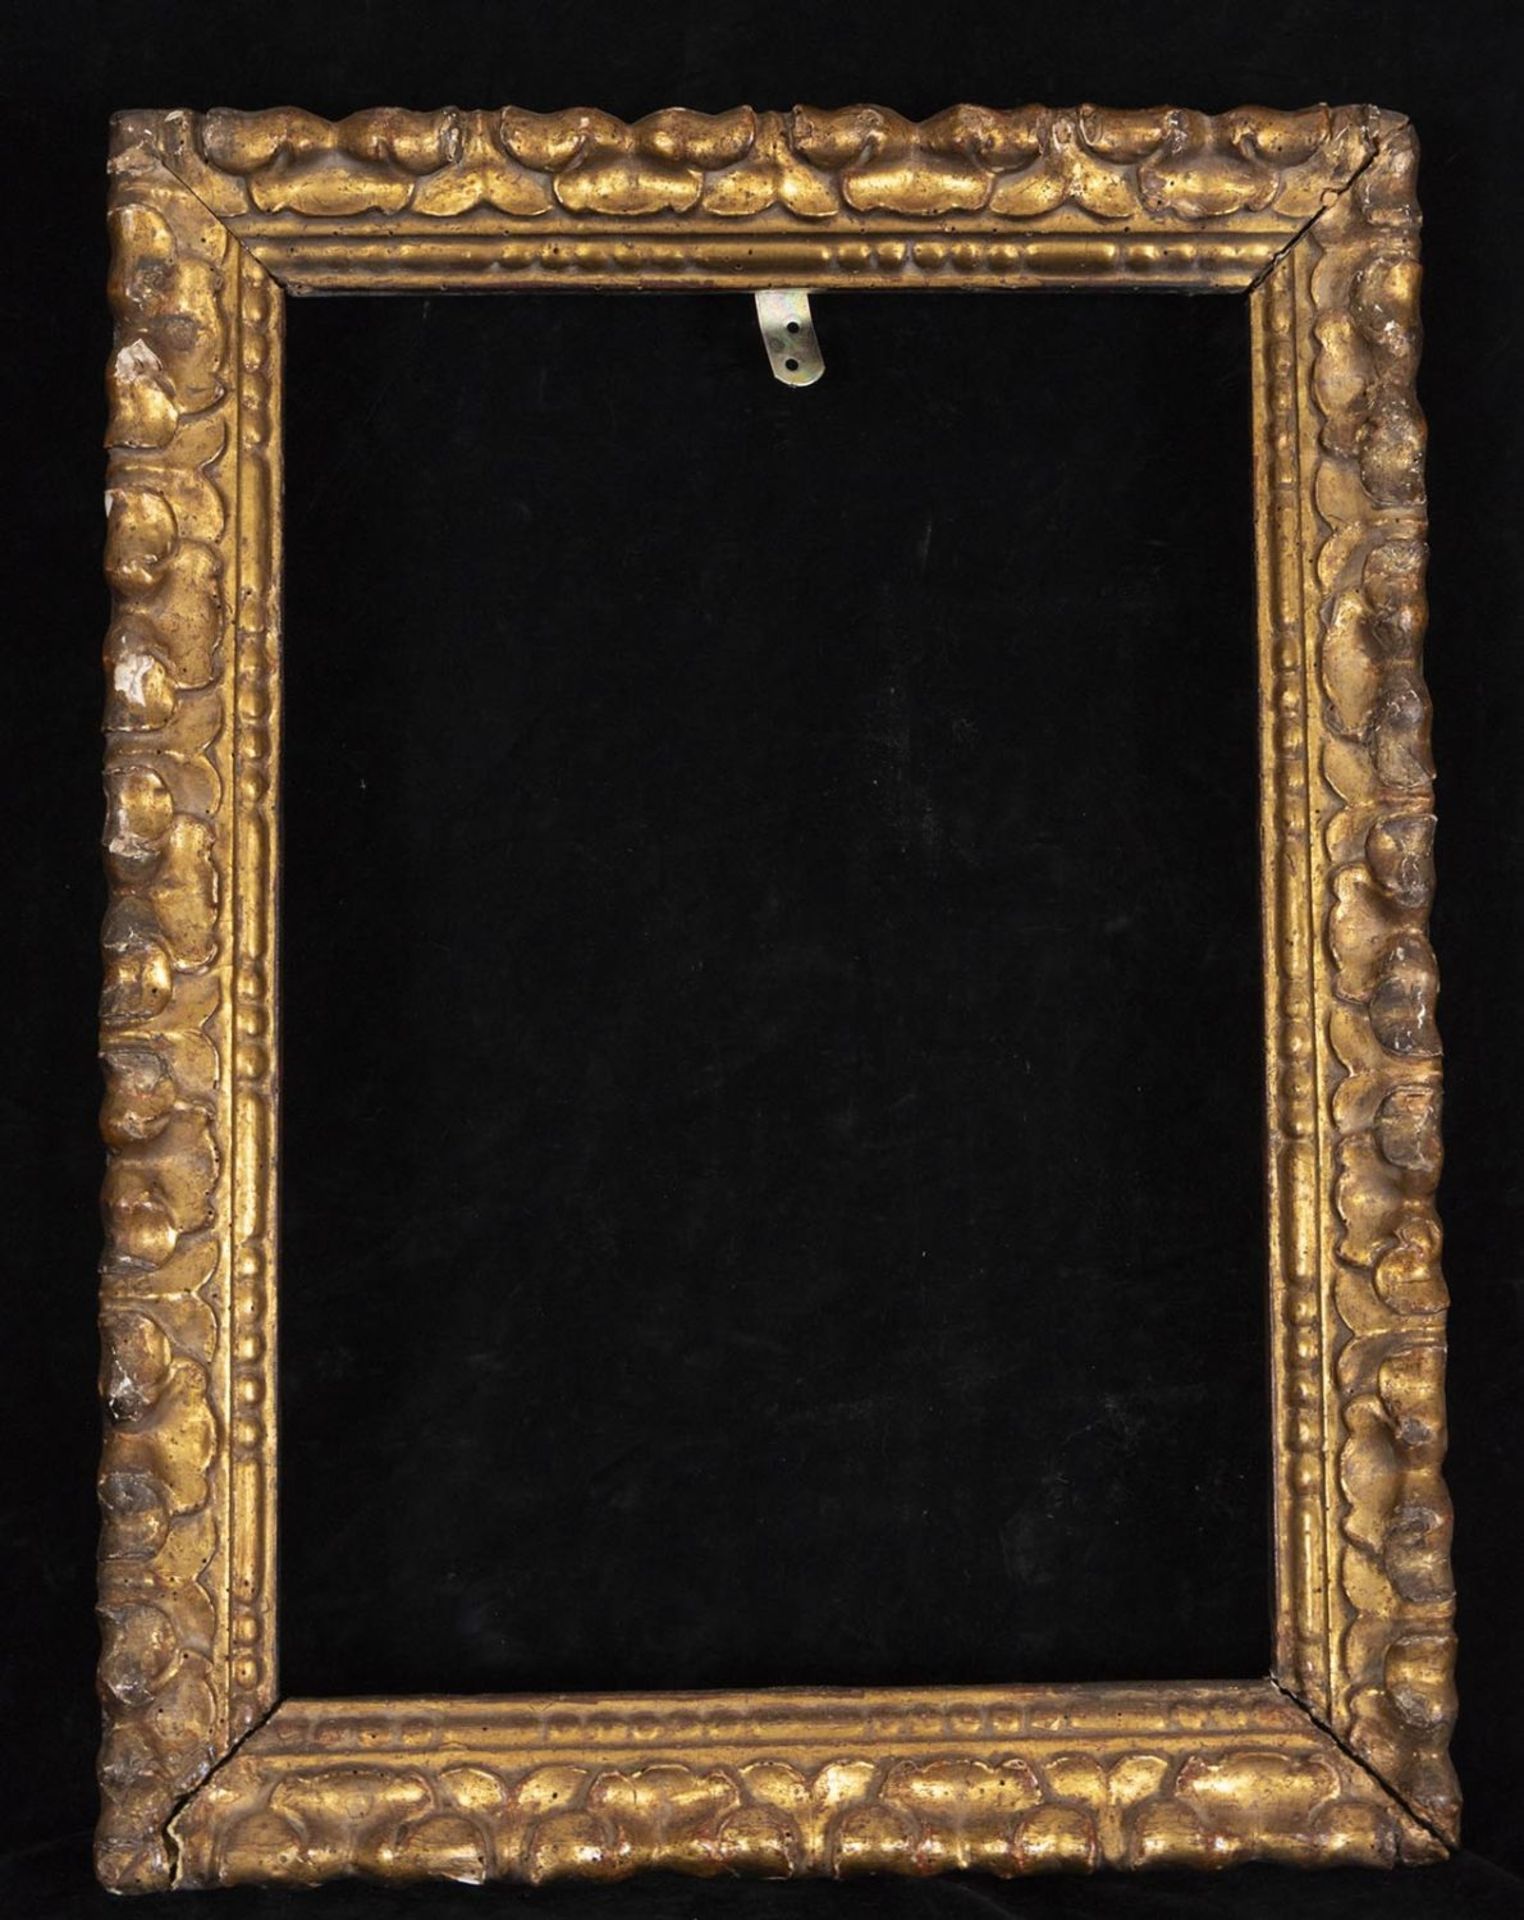 Important Spanish Baroque frame in wood gilded with gold leaf, 17th century